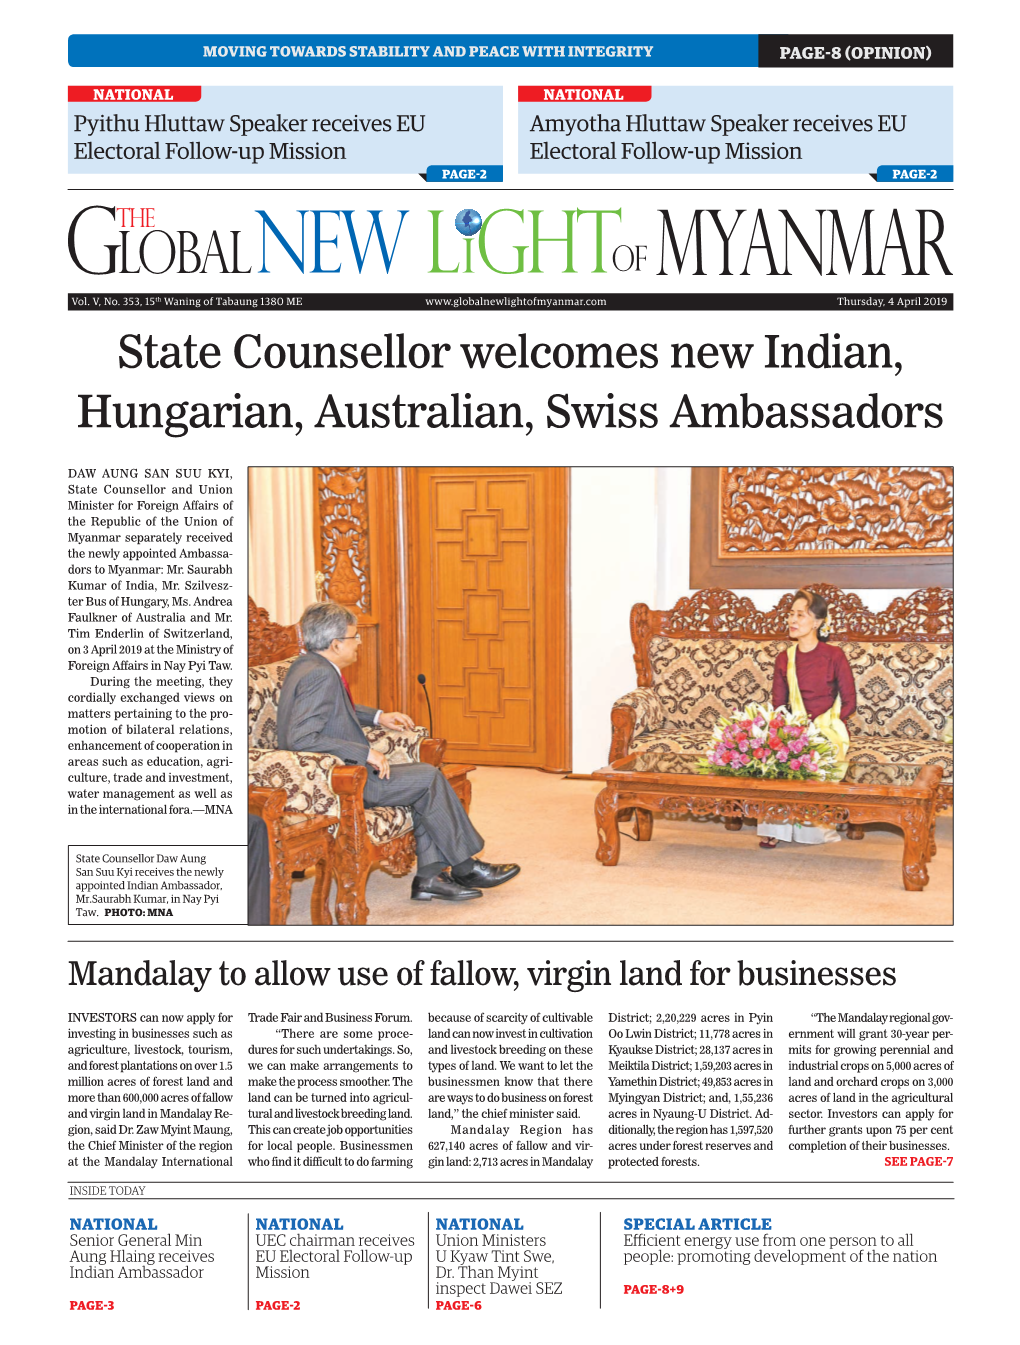 State Counsellor Welcomes New Indian, Hungarian, Australian, Swiss Ambassadors